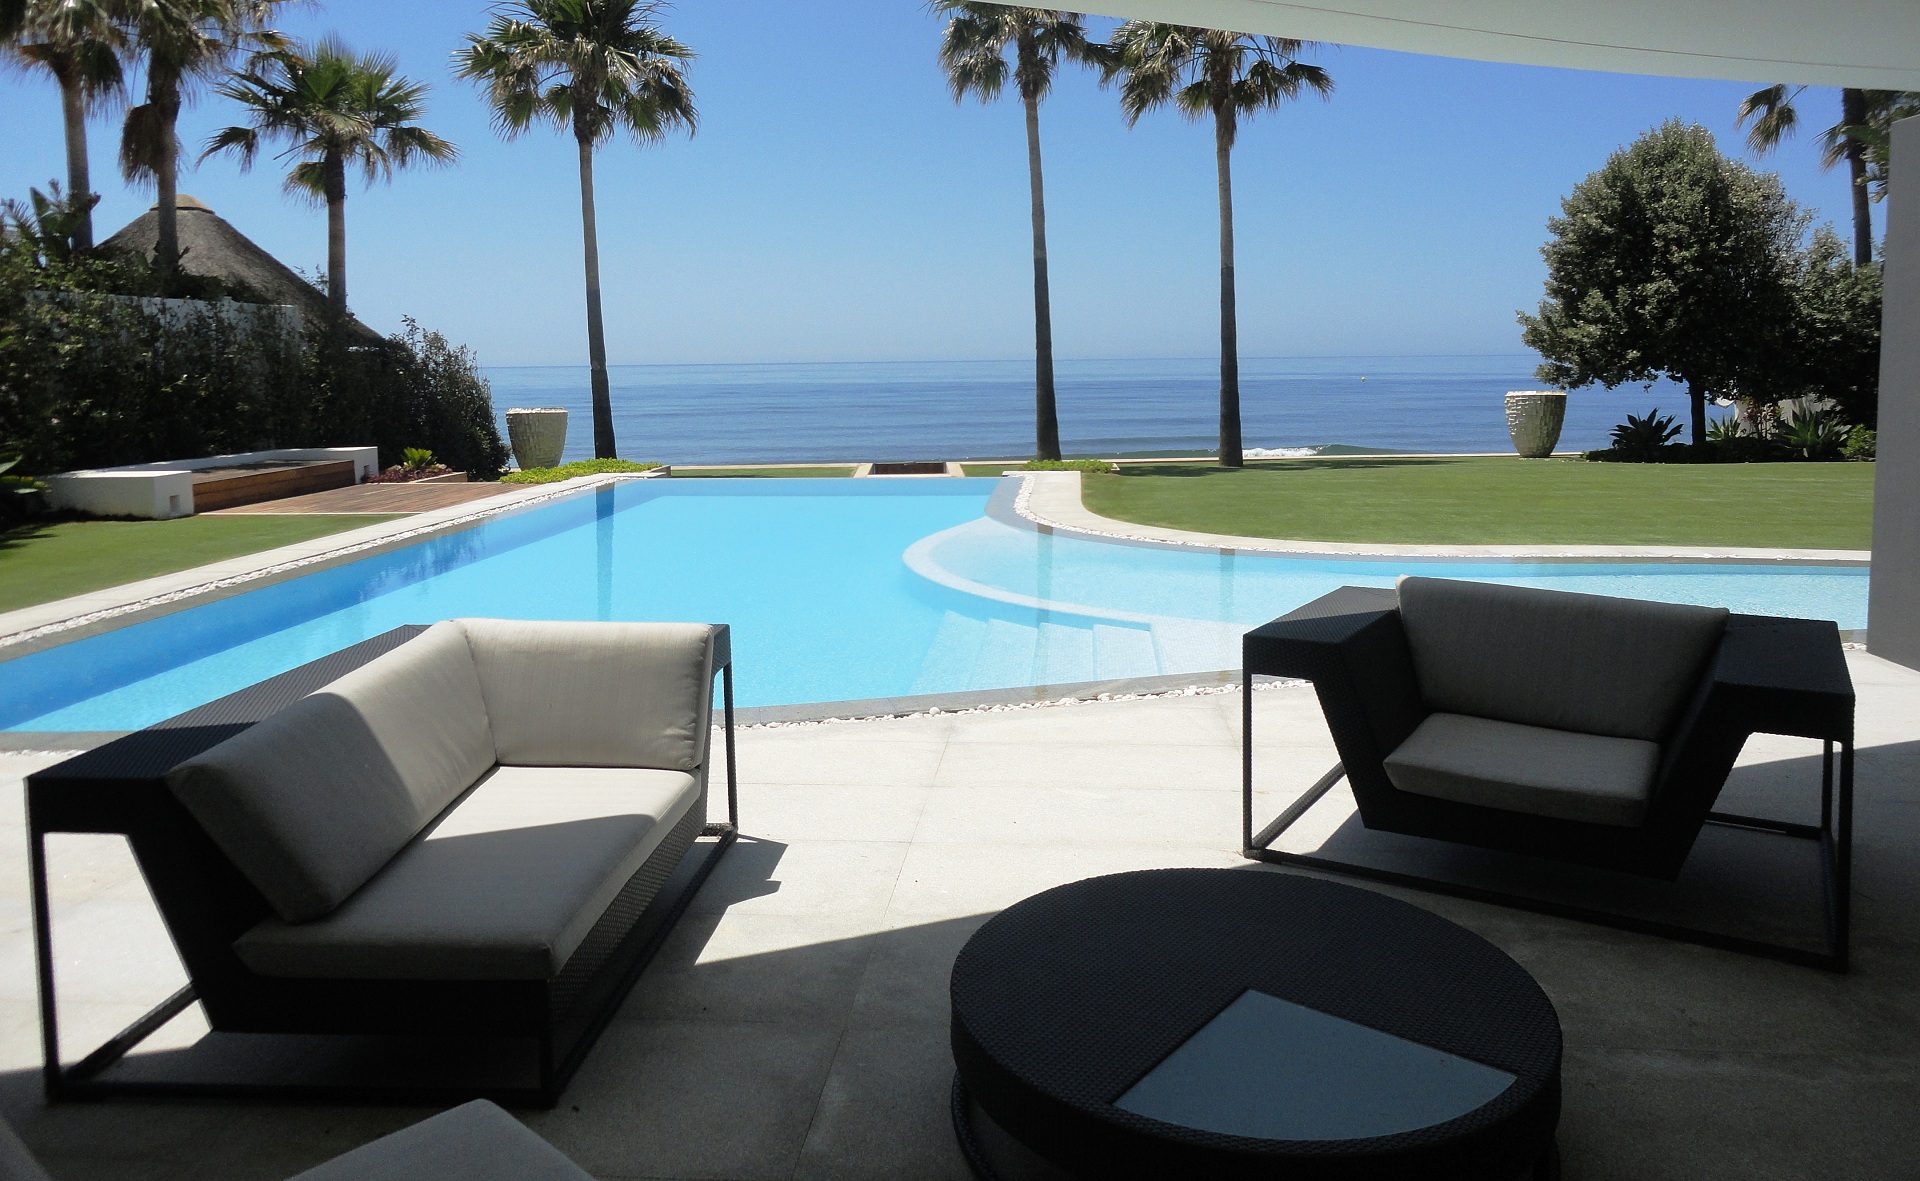 The property you are looking for - Nevado Realty real estate in Marbella